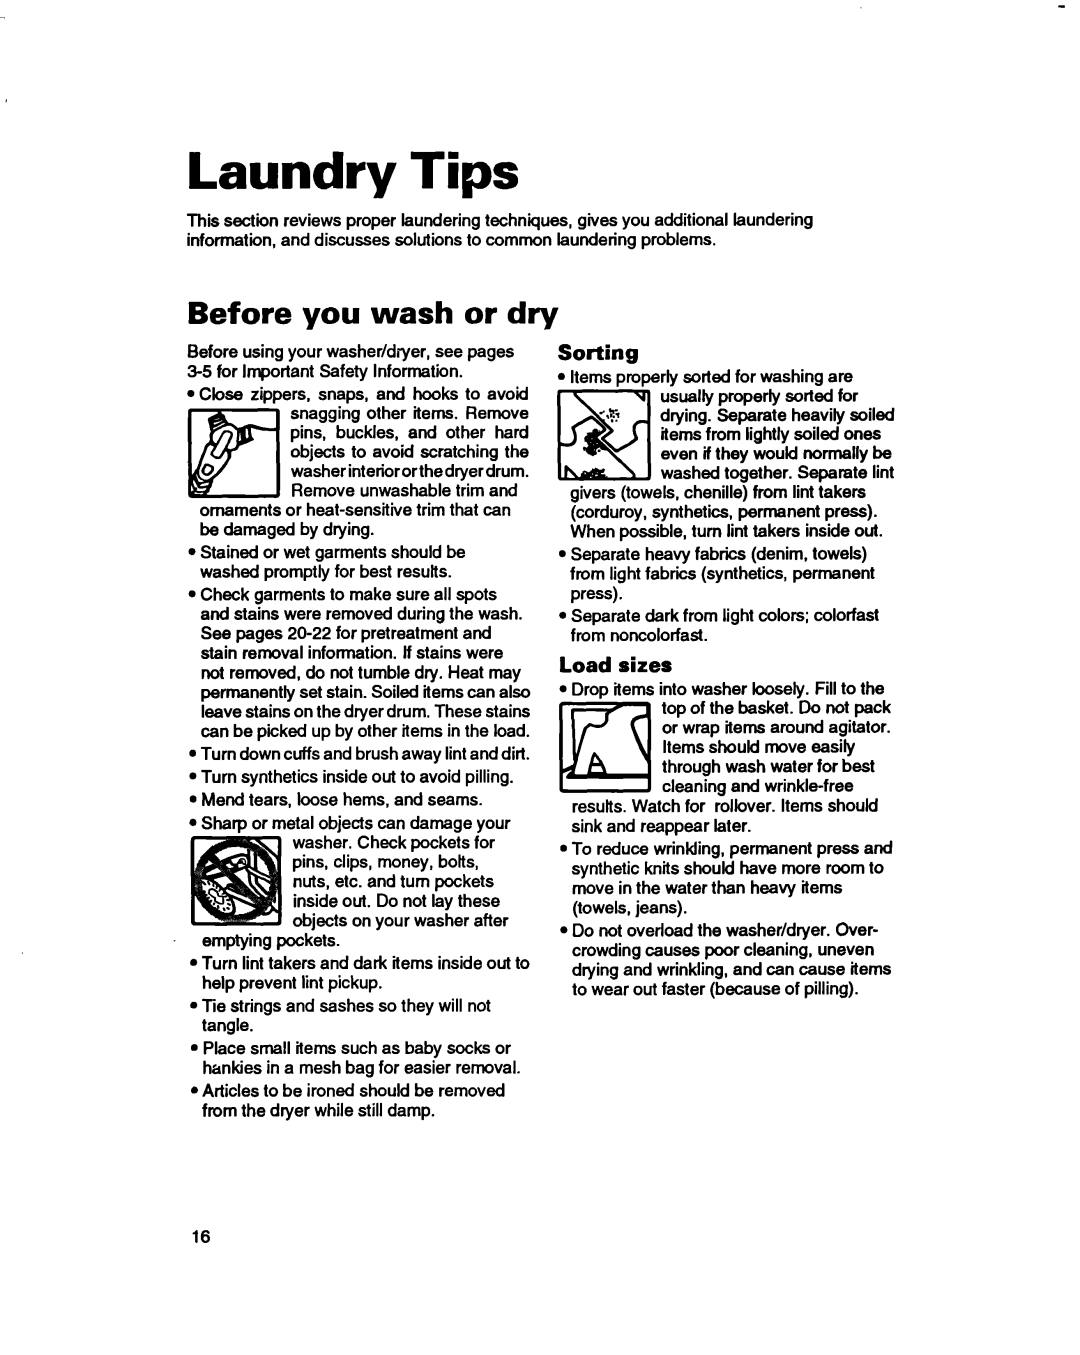 Whirlpool 3396314 warranty Laundry Tips, Before you wash or dry, Sorting, Load sizes 